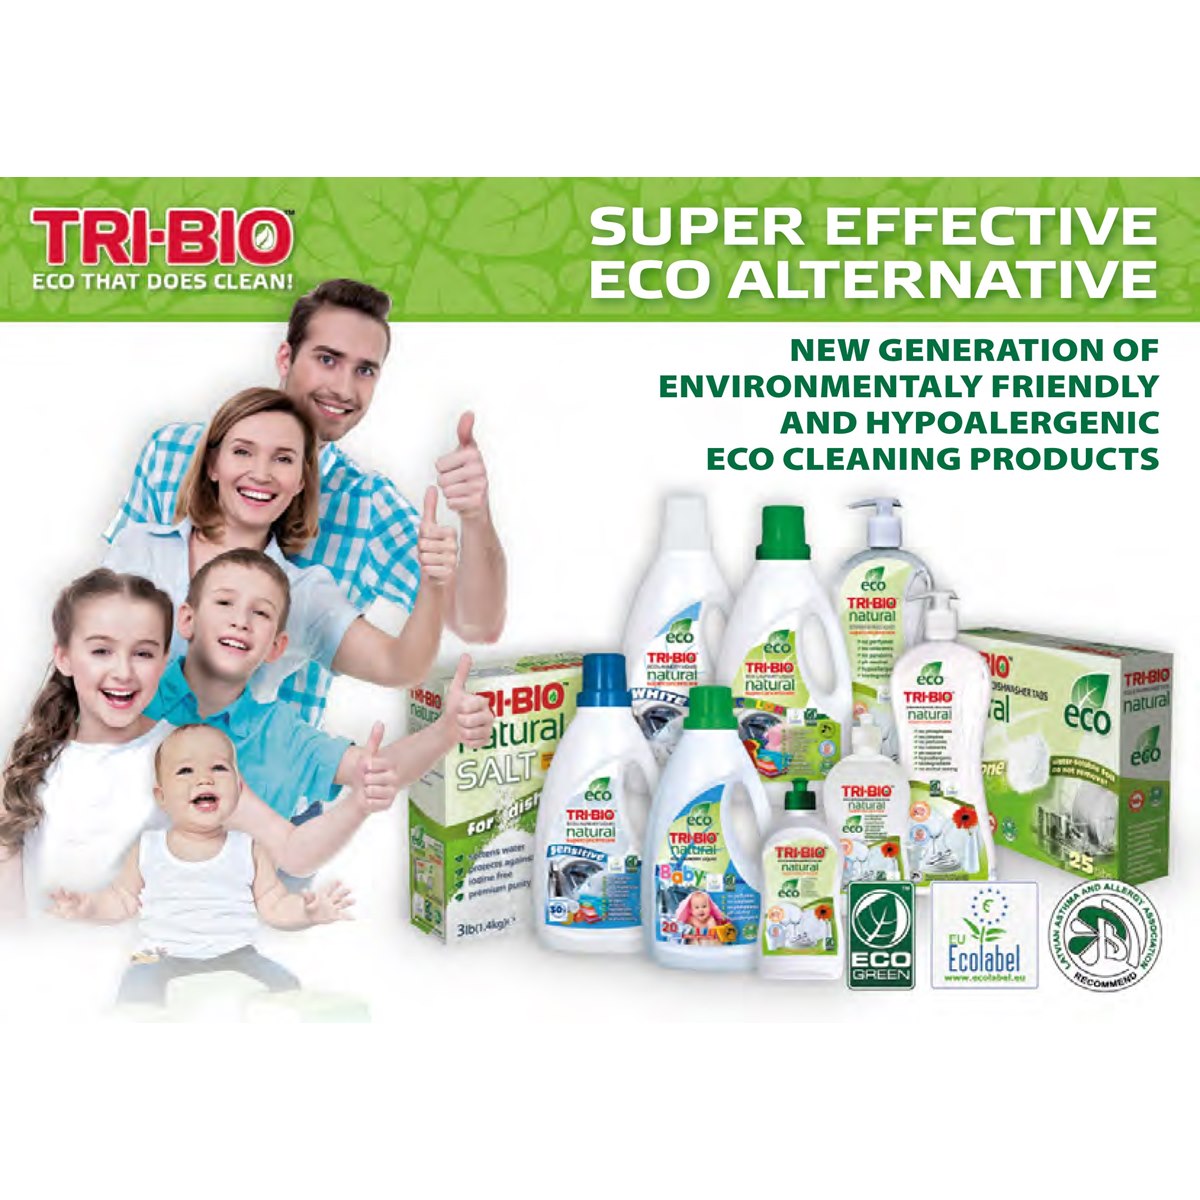 Where to buy Tri-Bio Products